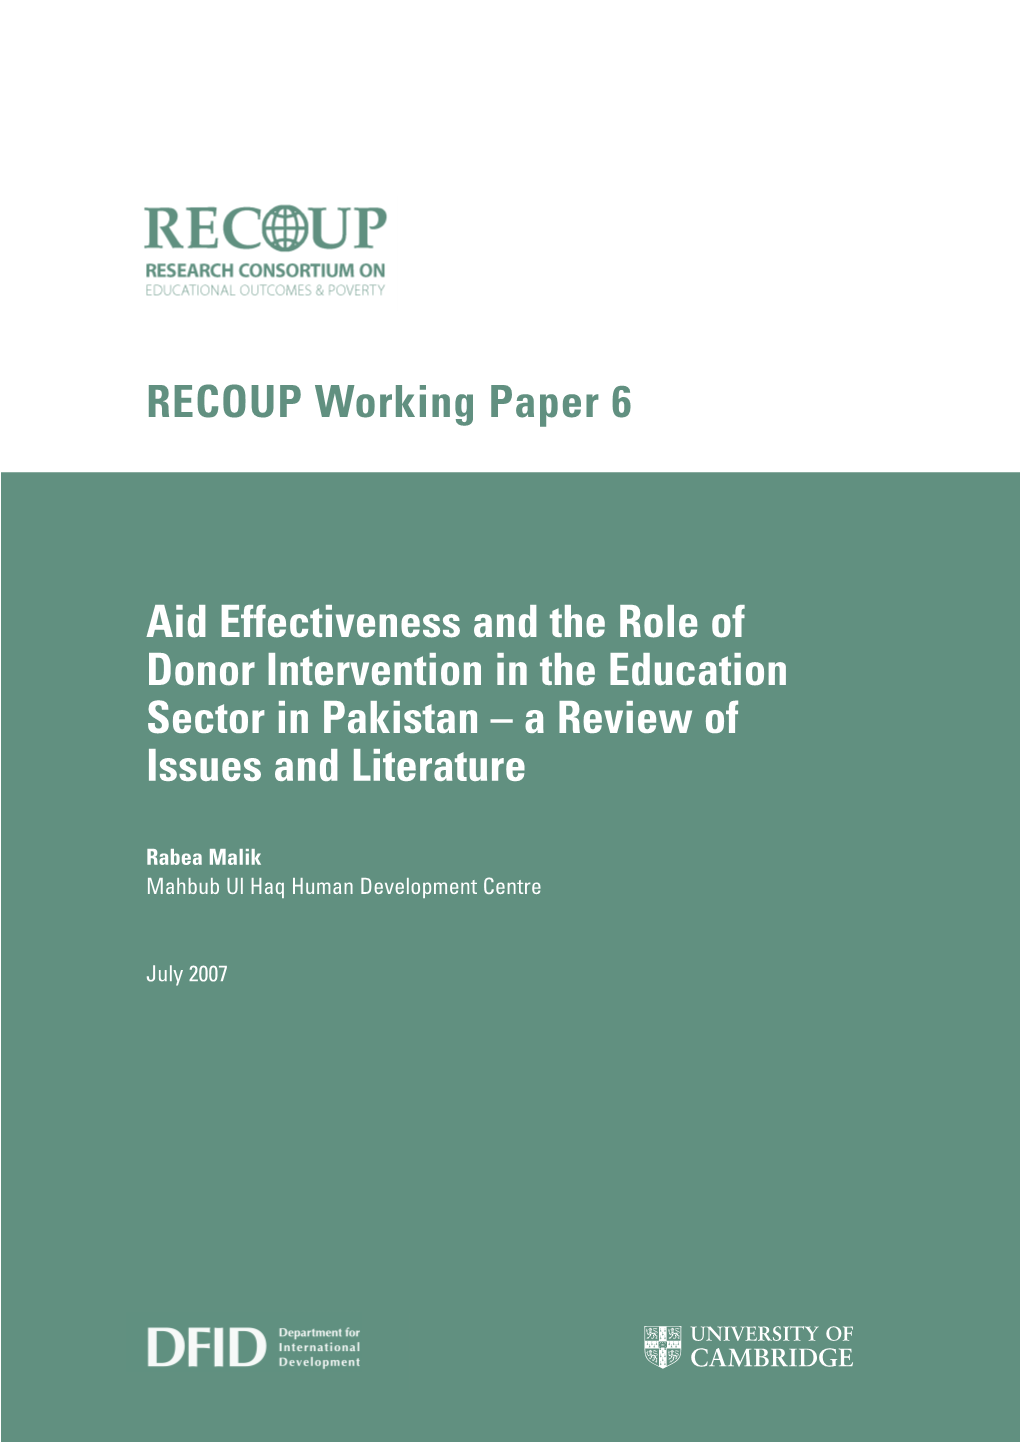 Aid Effectiveness and the Role of Donor Intervention in the Education Sector in Pakistan – a Review of Issues and Literature